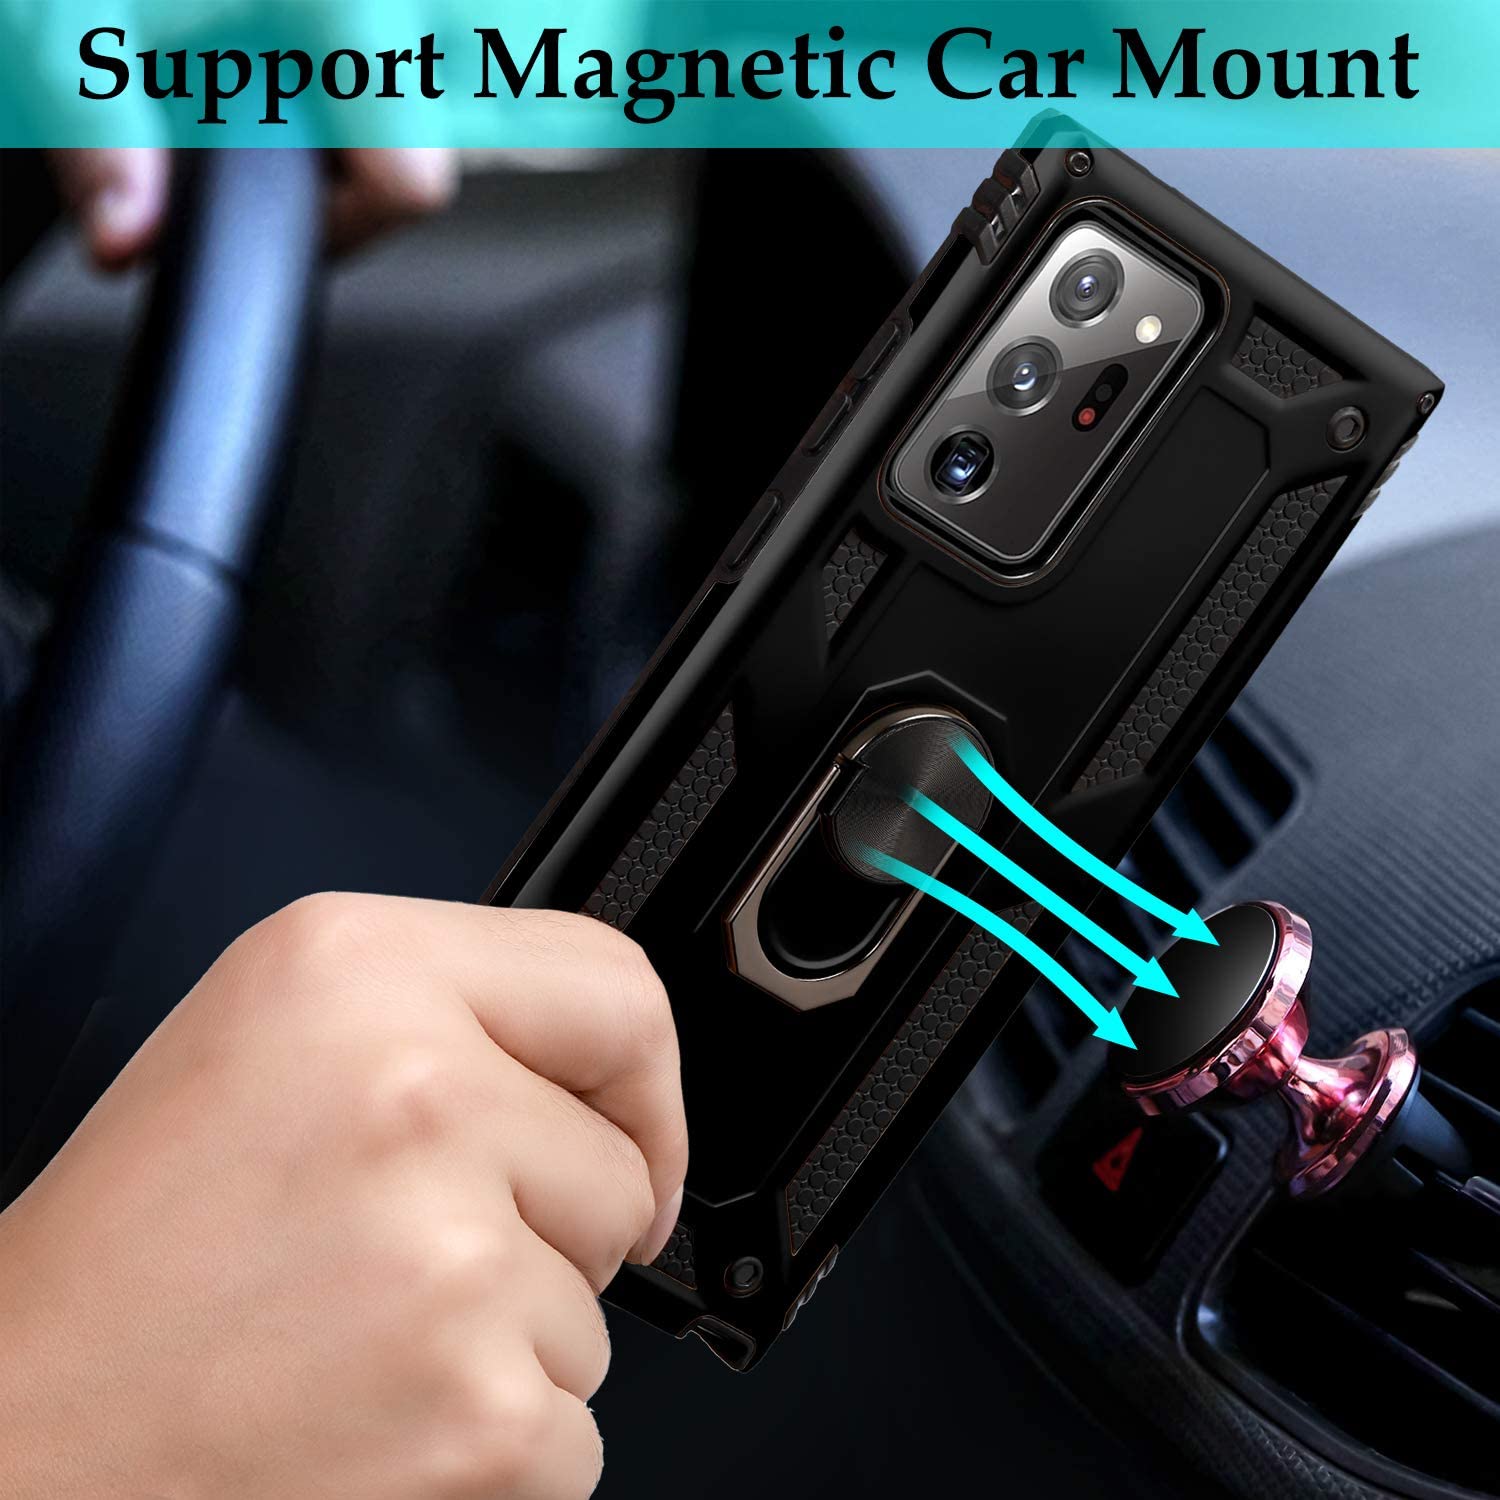 Rugged Shockproof Heavy Duty Military Phone Case Cover for Men Women [Support Magnetic Car Mount], Black - e4cents